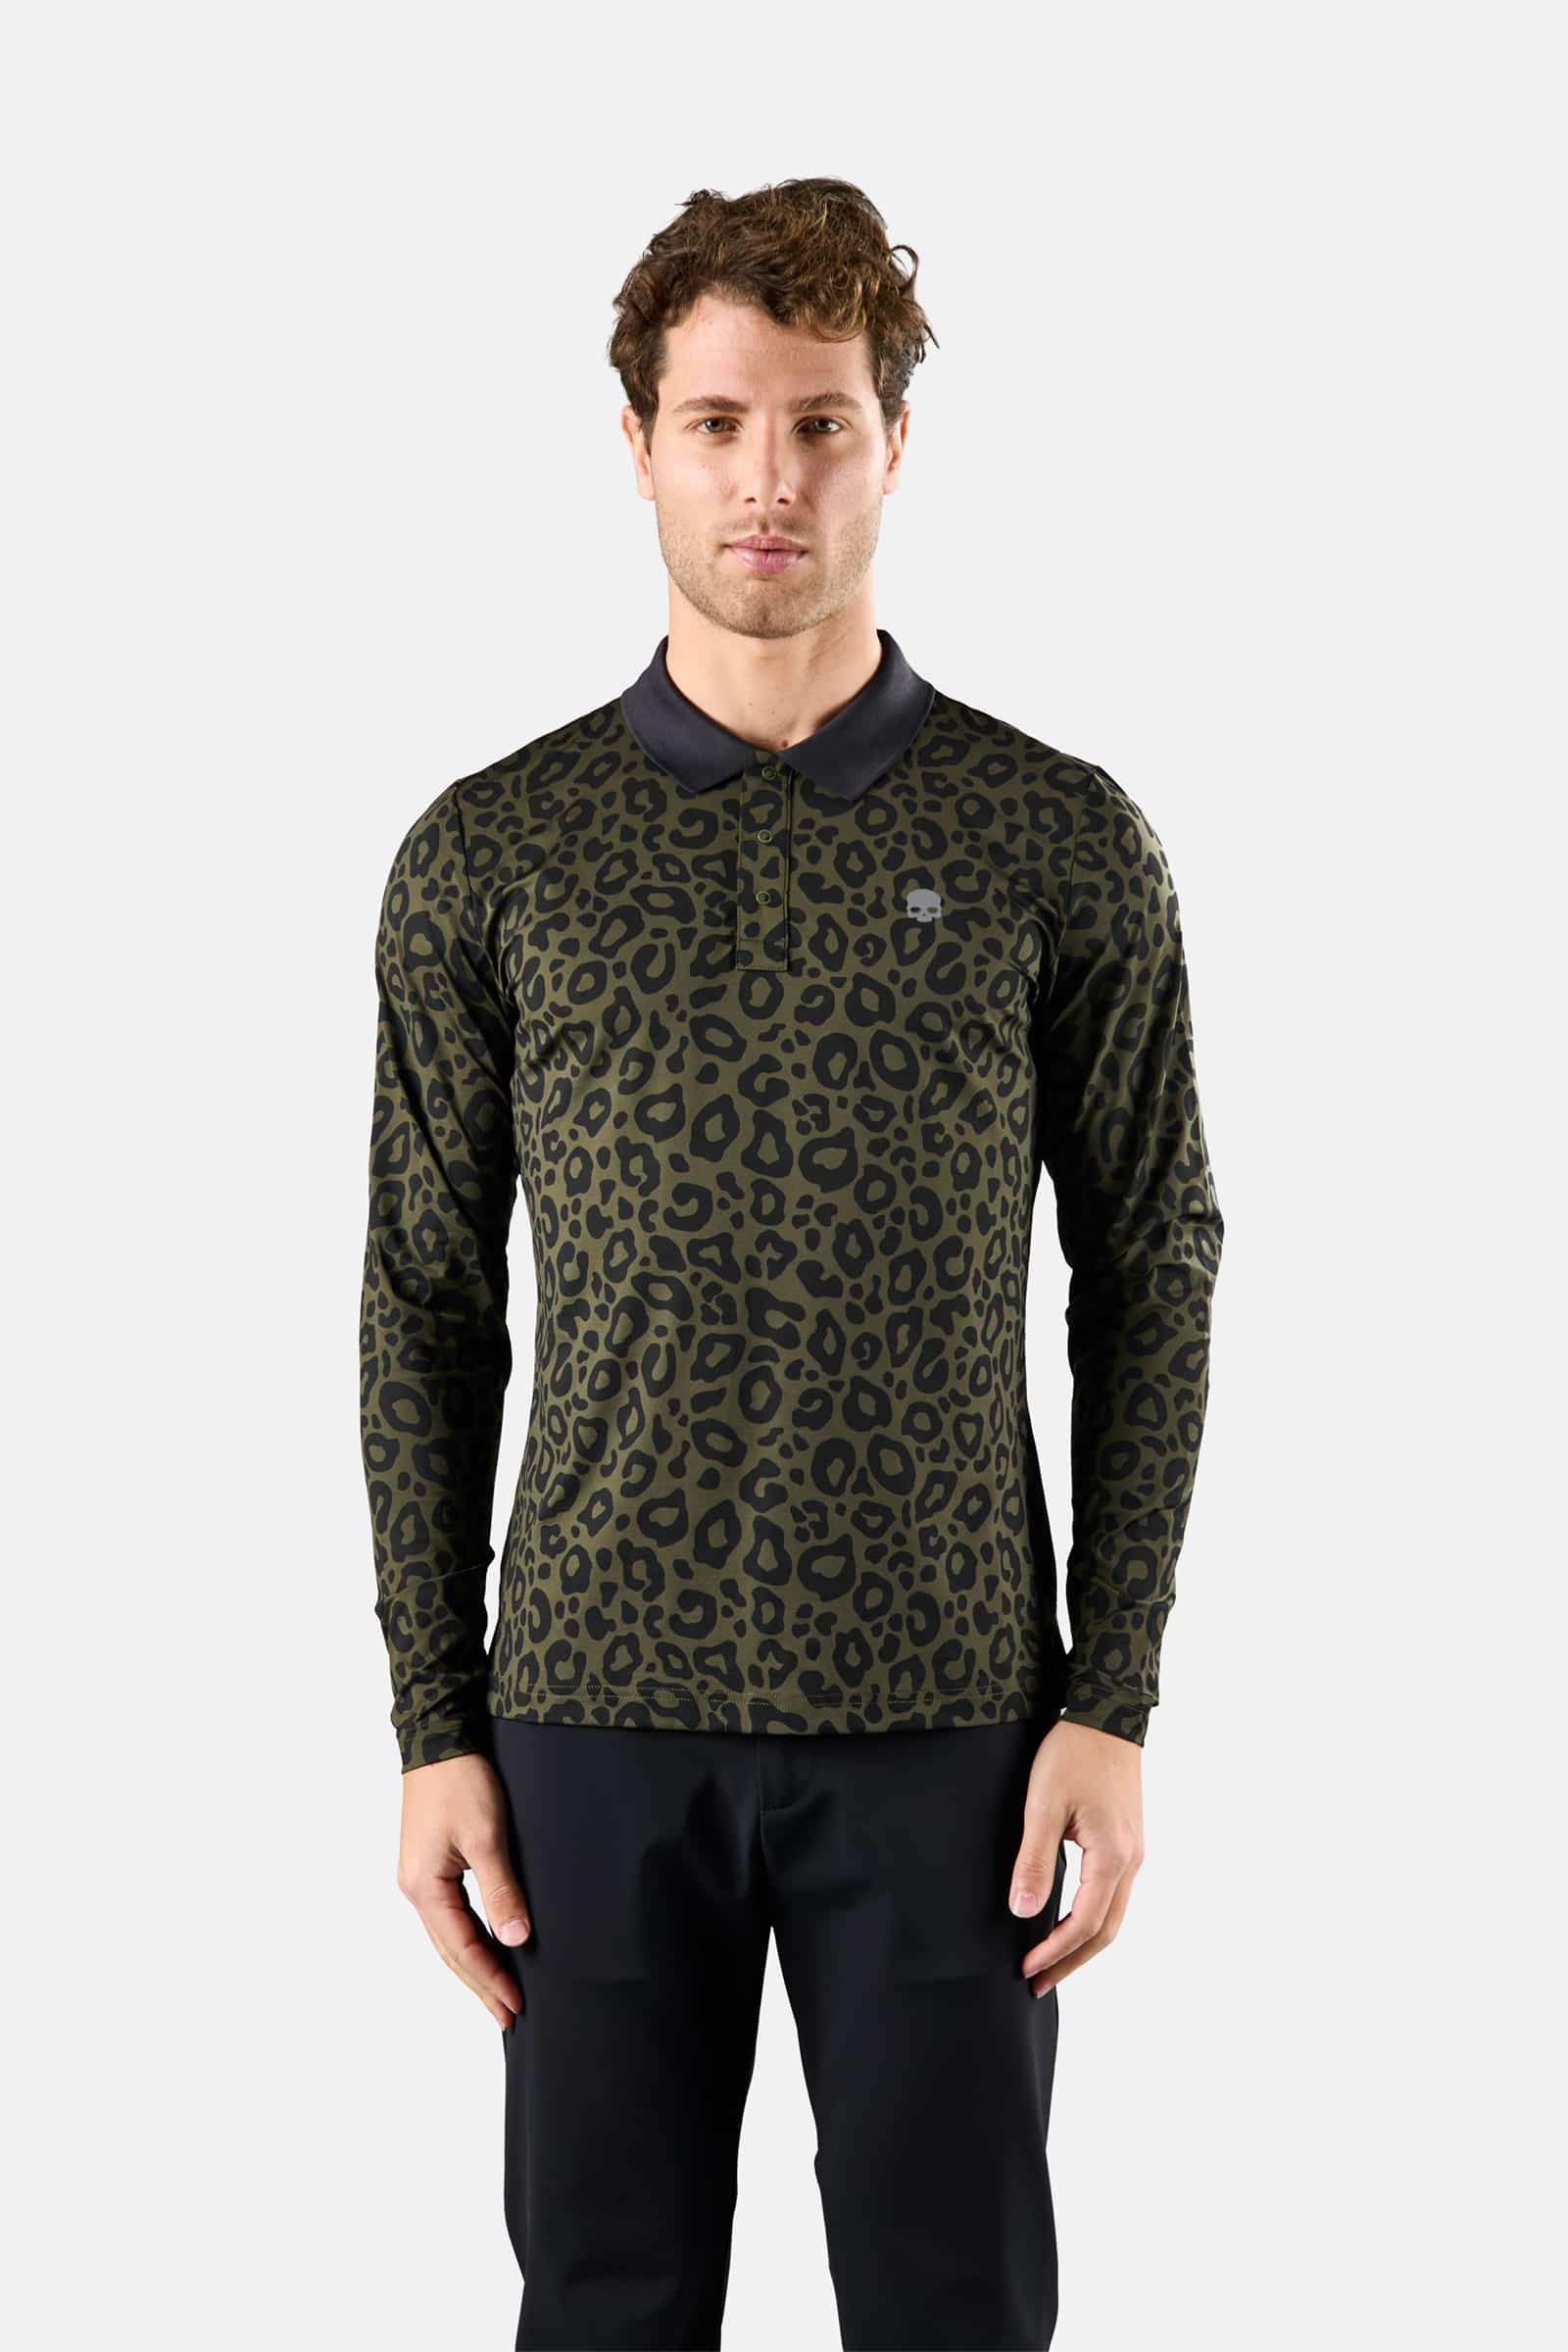 PRINTED POLO LS - MILITARY GREEN,PANTHER - Hydrogen - Luxury Sportwear